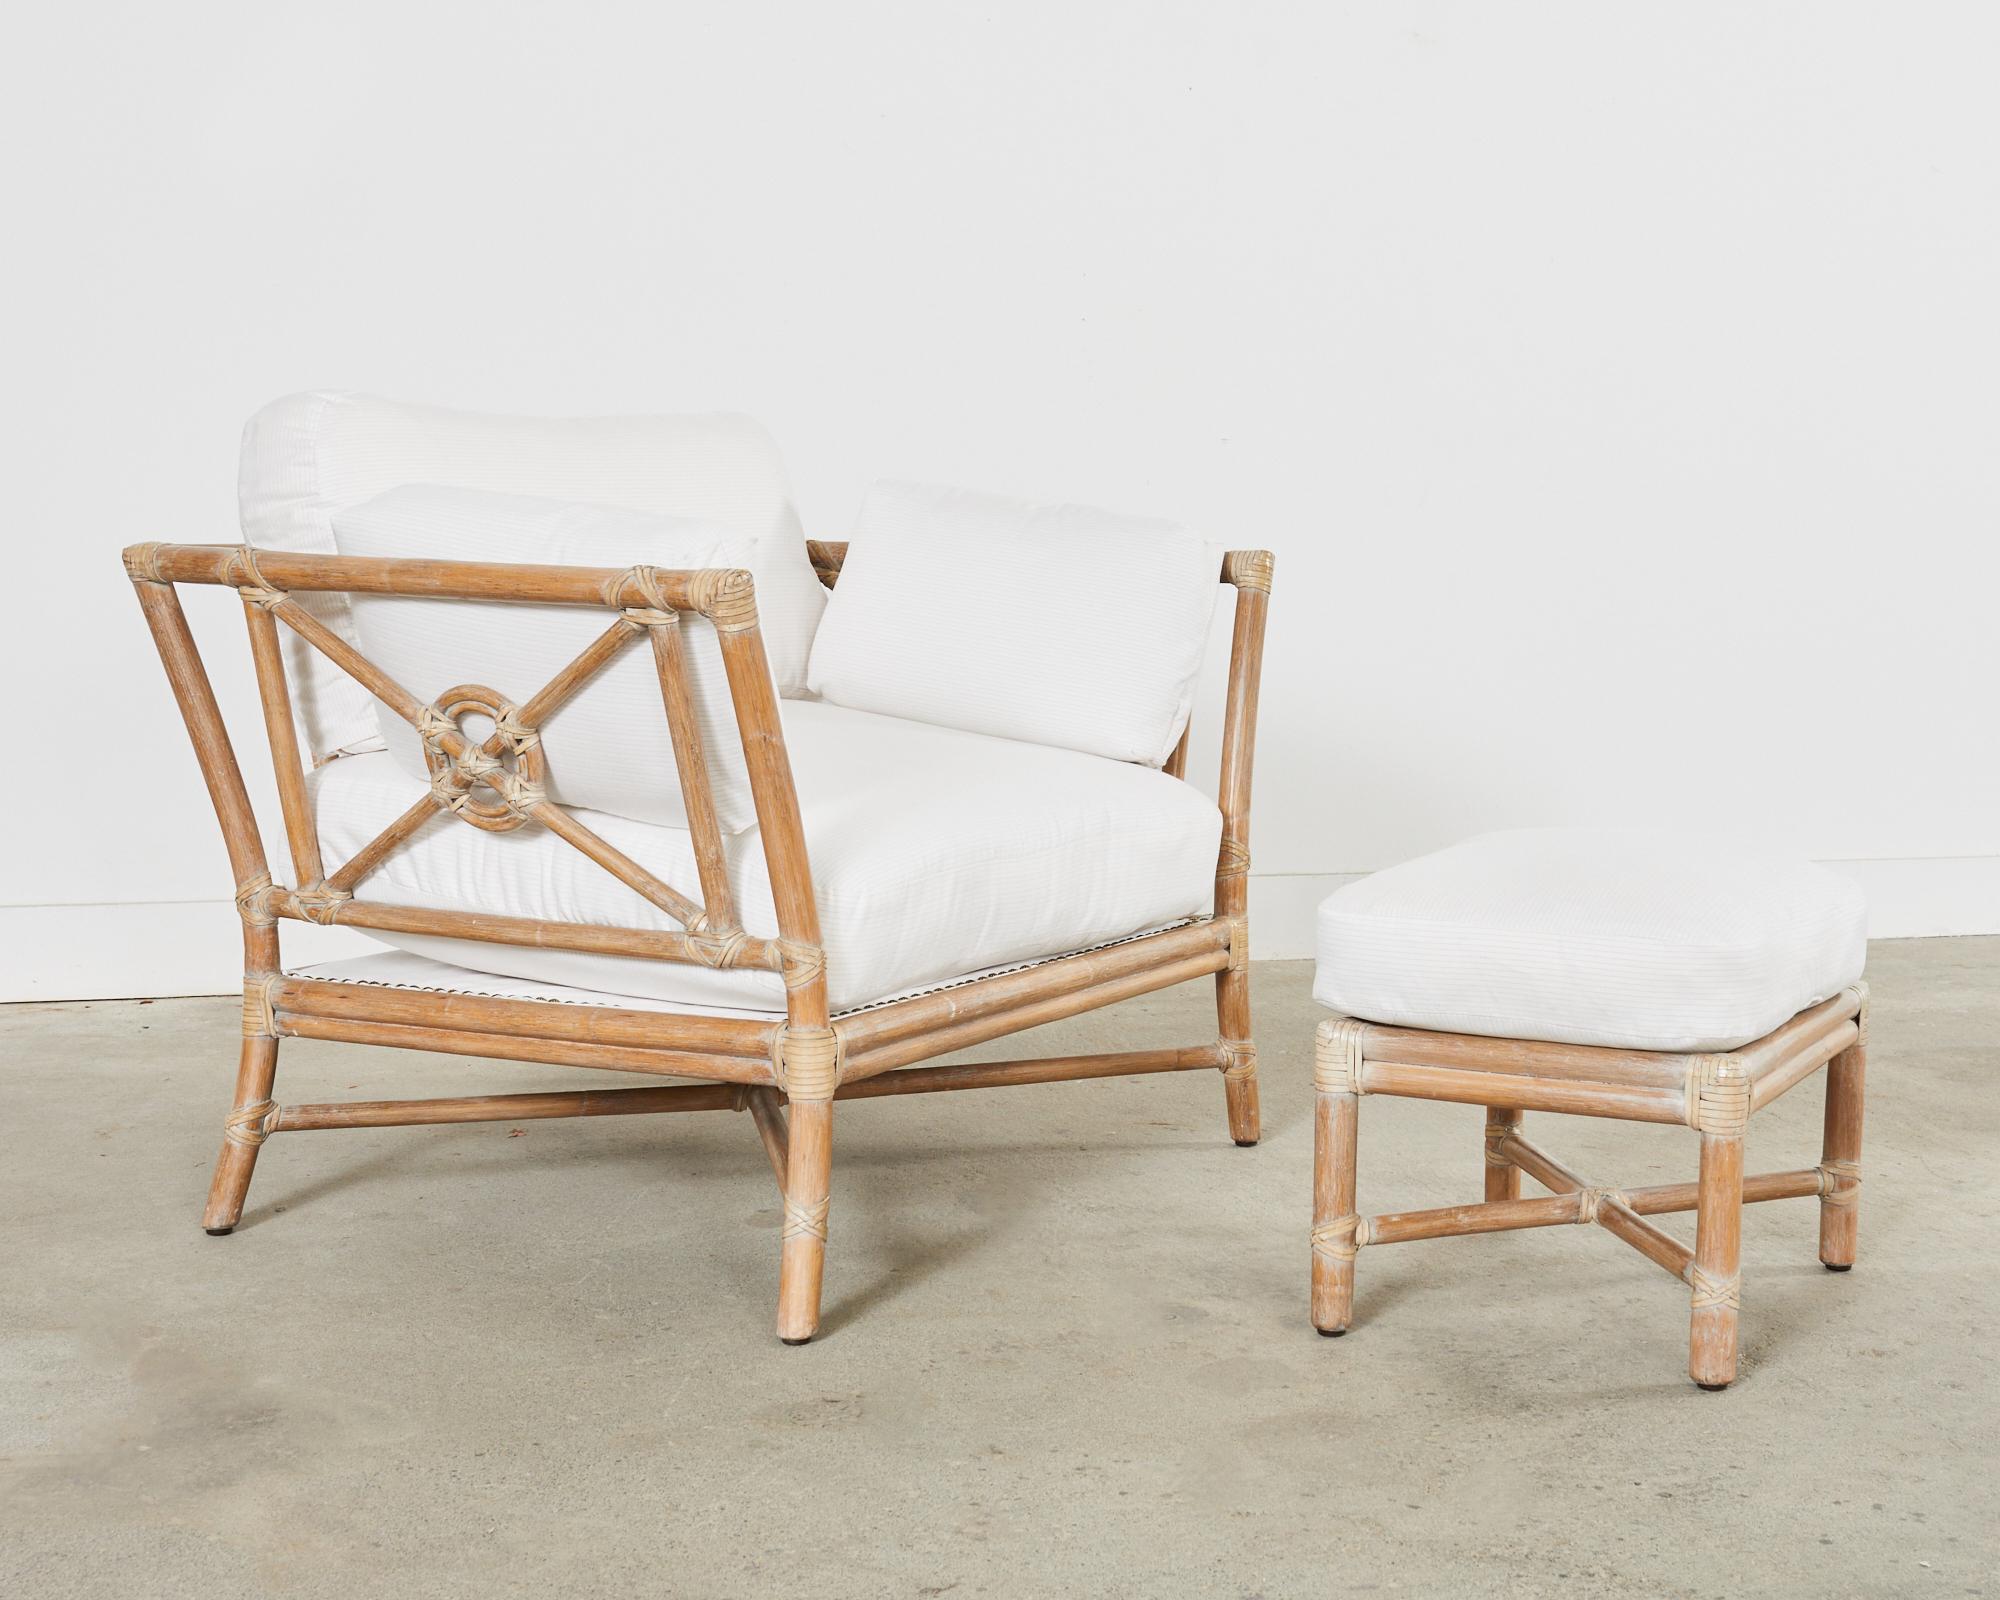 Oversized McGuire rattan lounge chair or club chair with matching ottoman featuring the iconic target design by Elinor McGuire. Made in the fabulous California coastal organic modern style featuring a subtle cerused or glazed finish on the rattan.